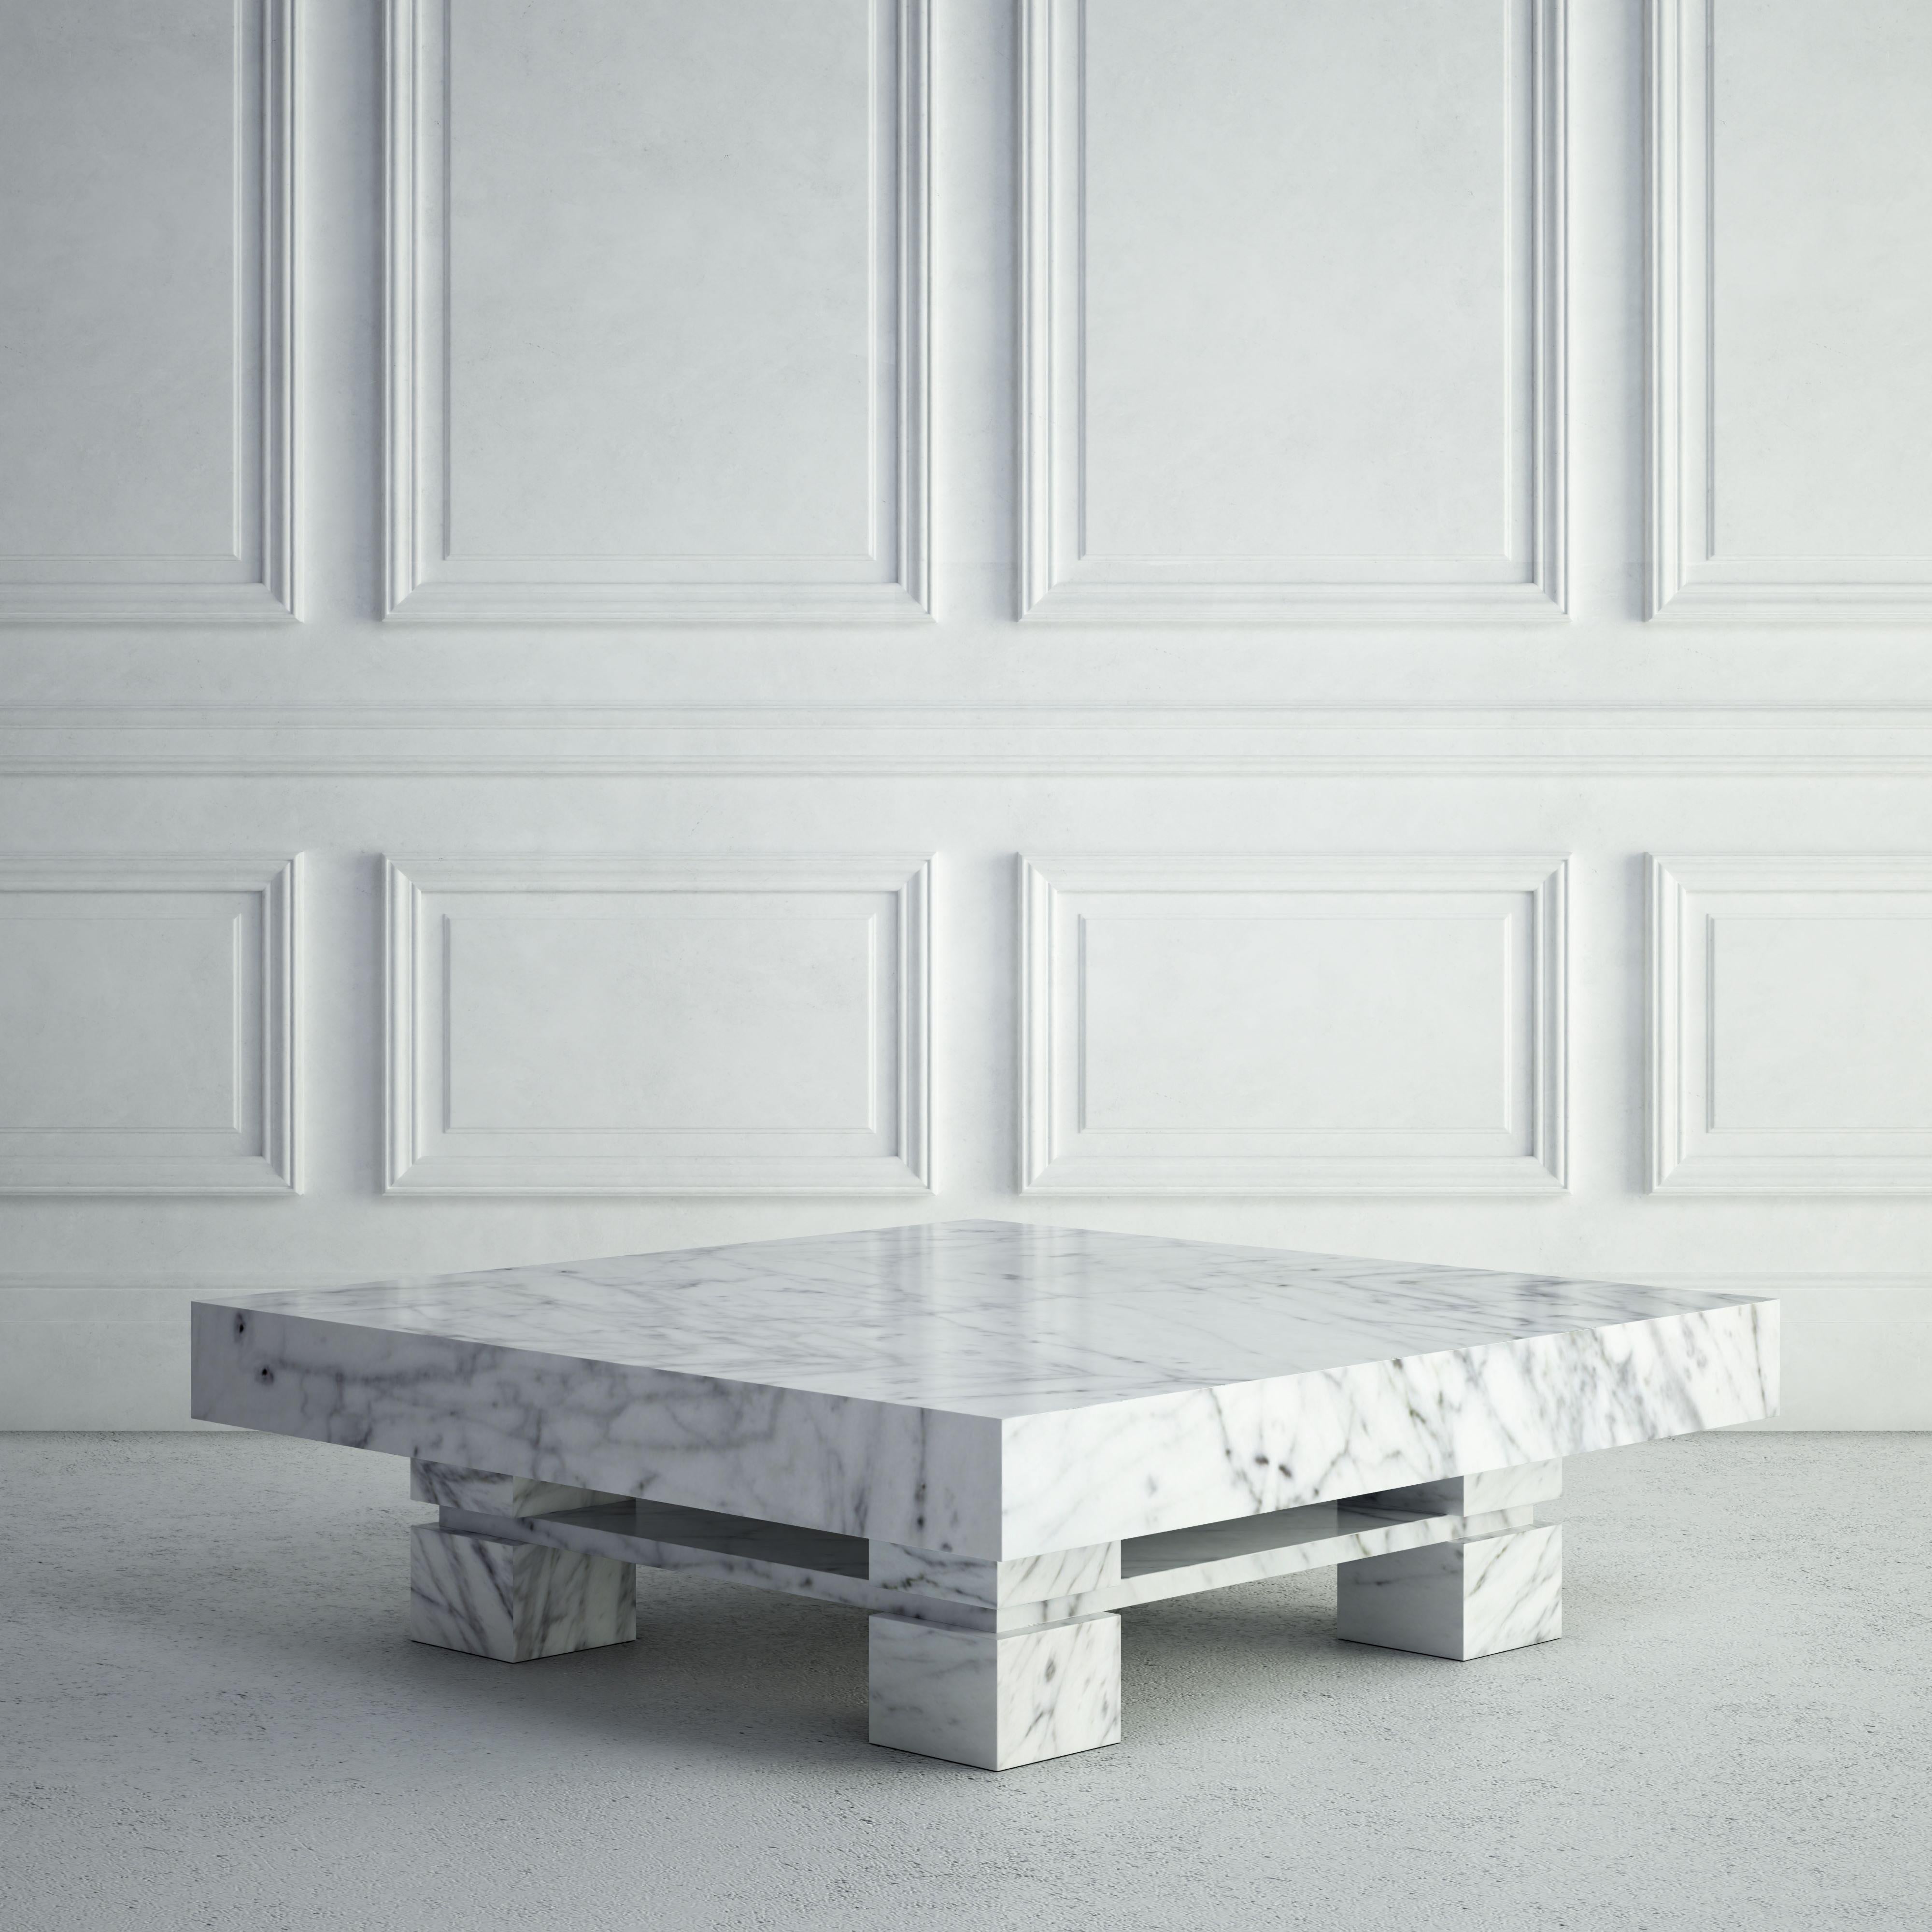 American The Elodie: A Modern Stone Coffee Table with a Square Top and Four Square Bases For Sale